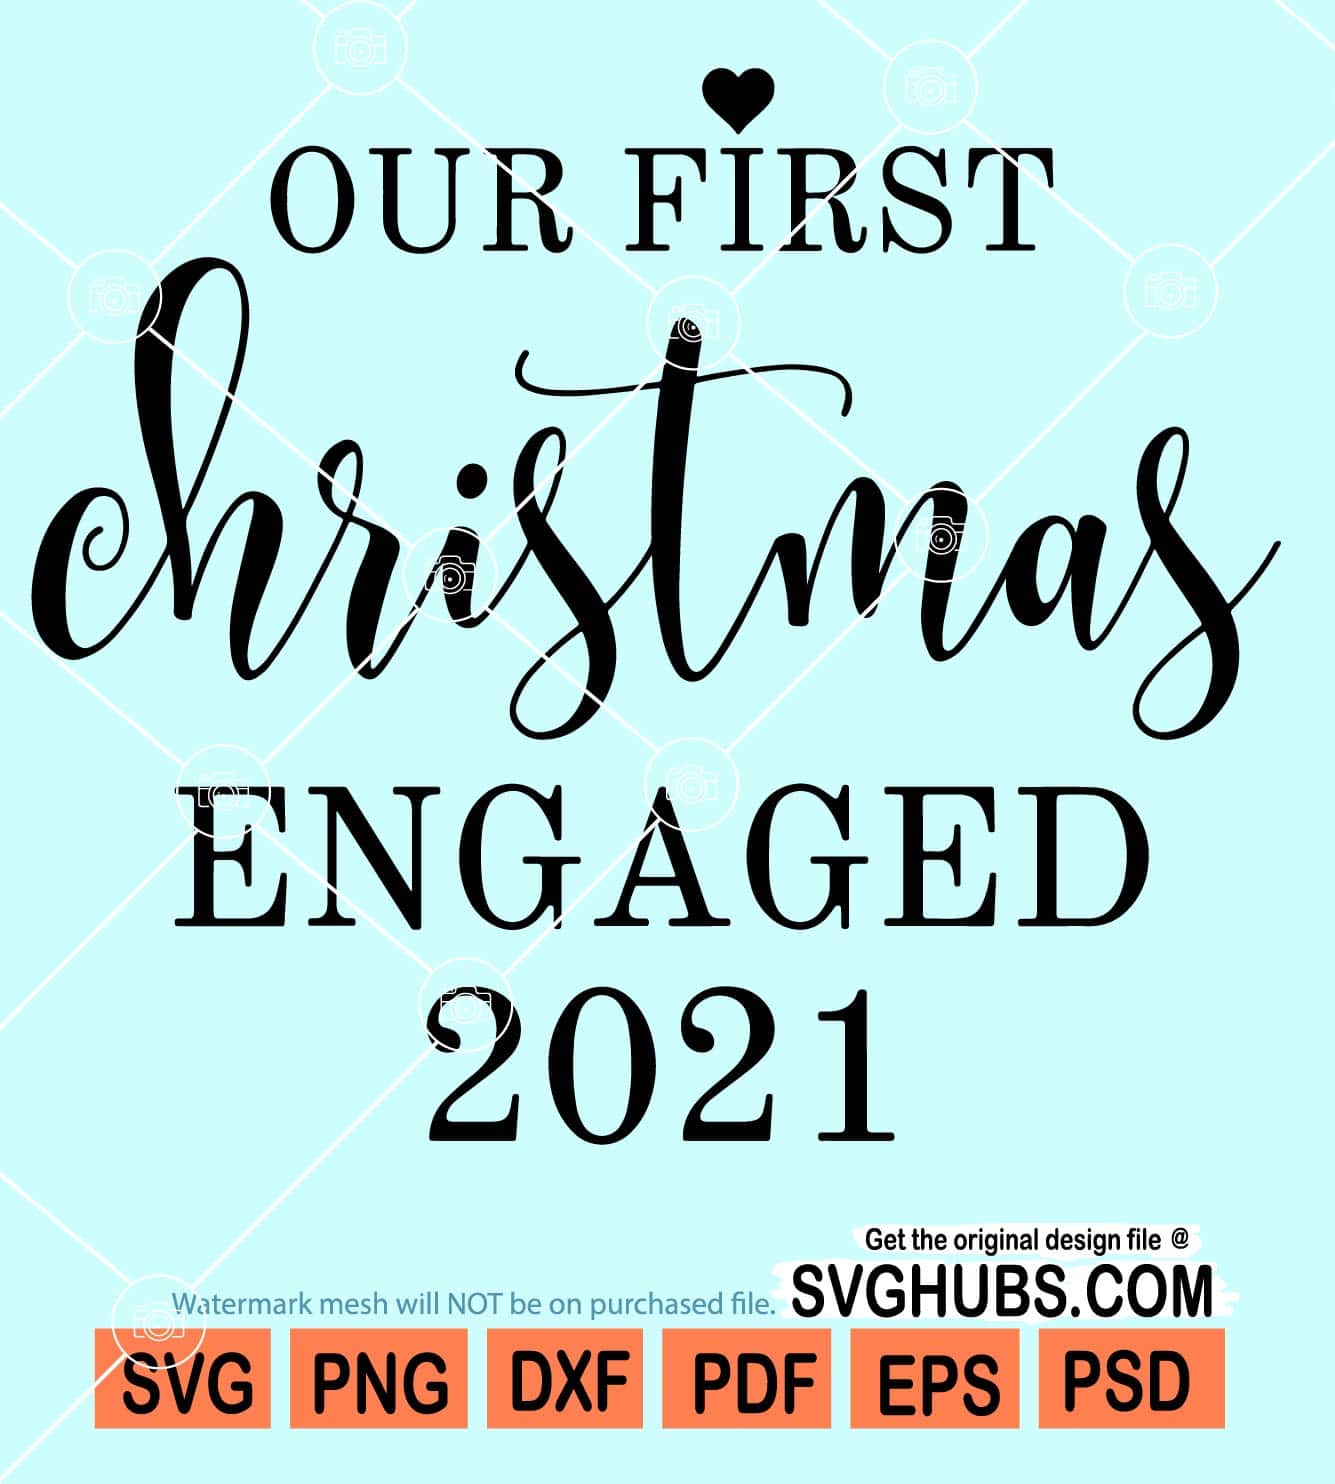 Our first christmas engaged 2021 svg